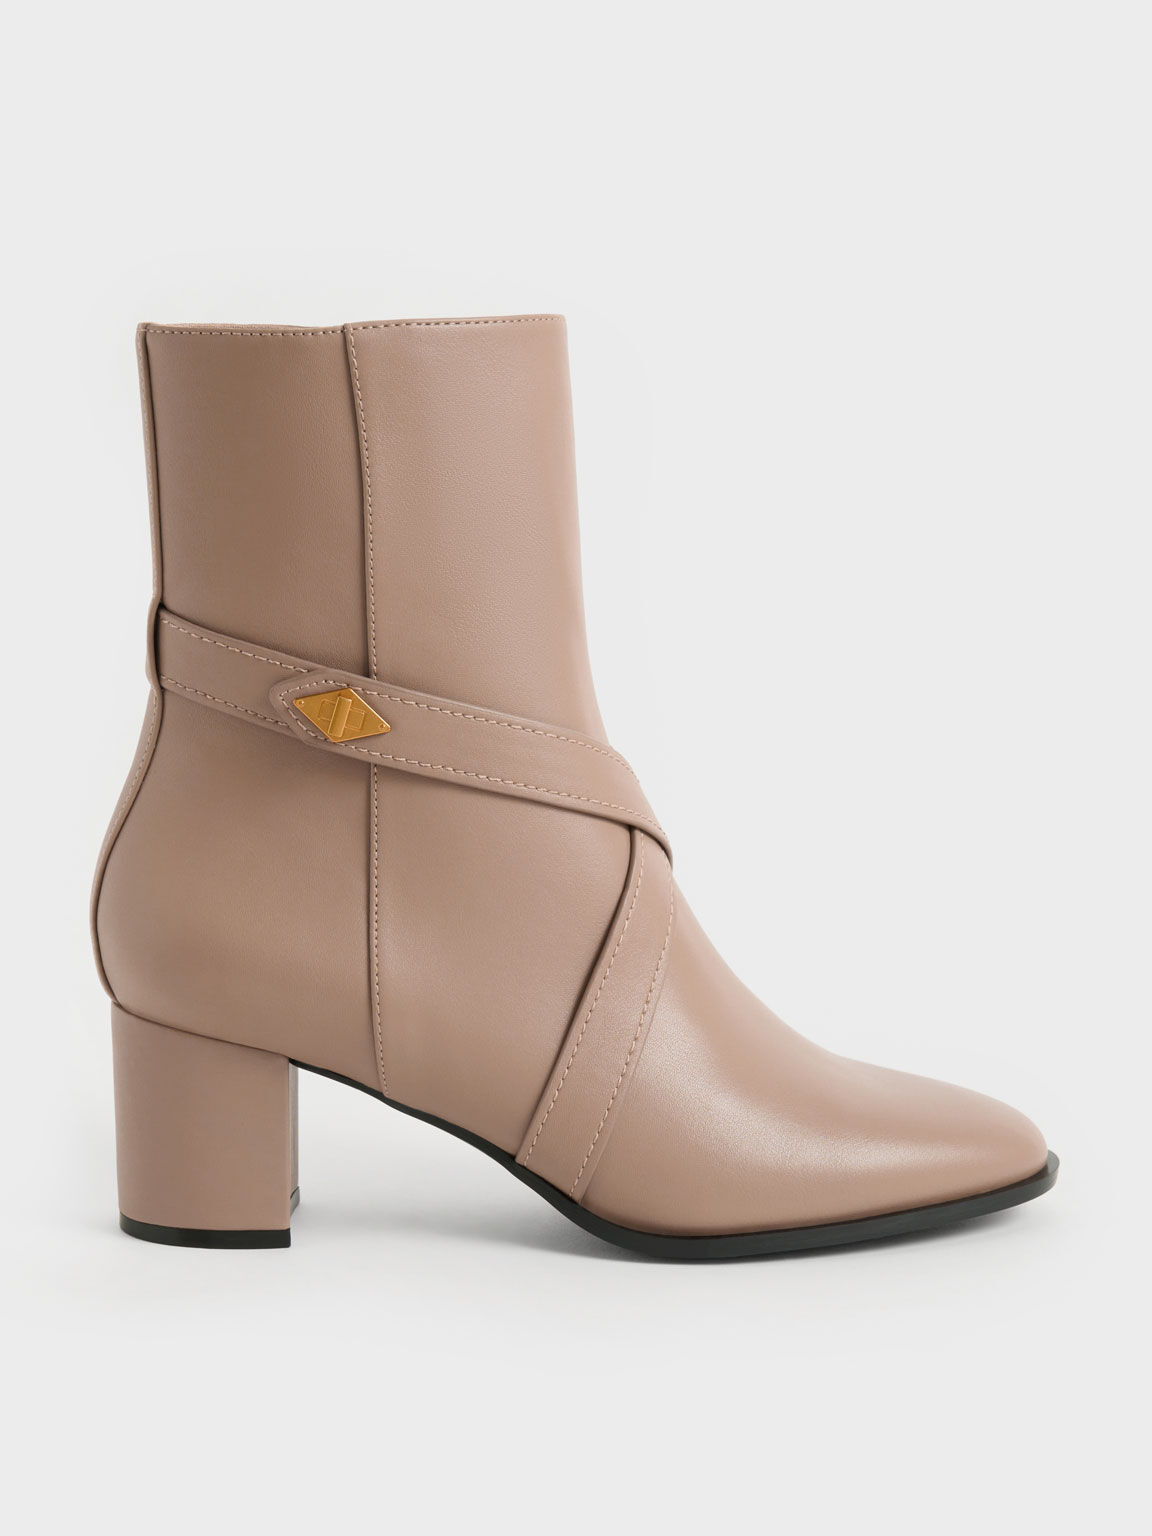 Metallic Accent Crossover Ankle Boots, Camel, hi-res